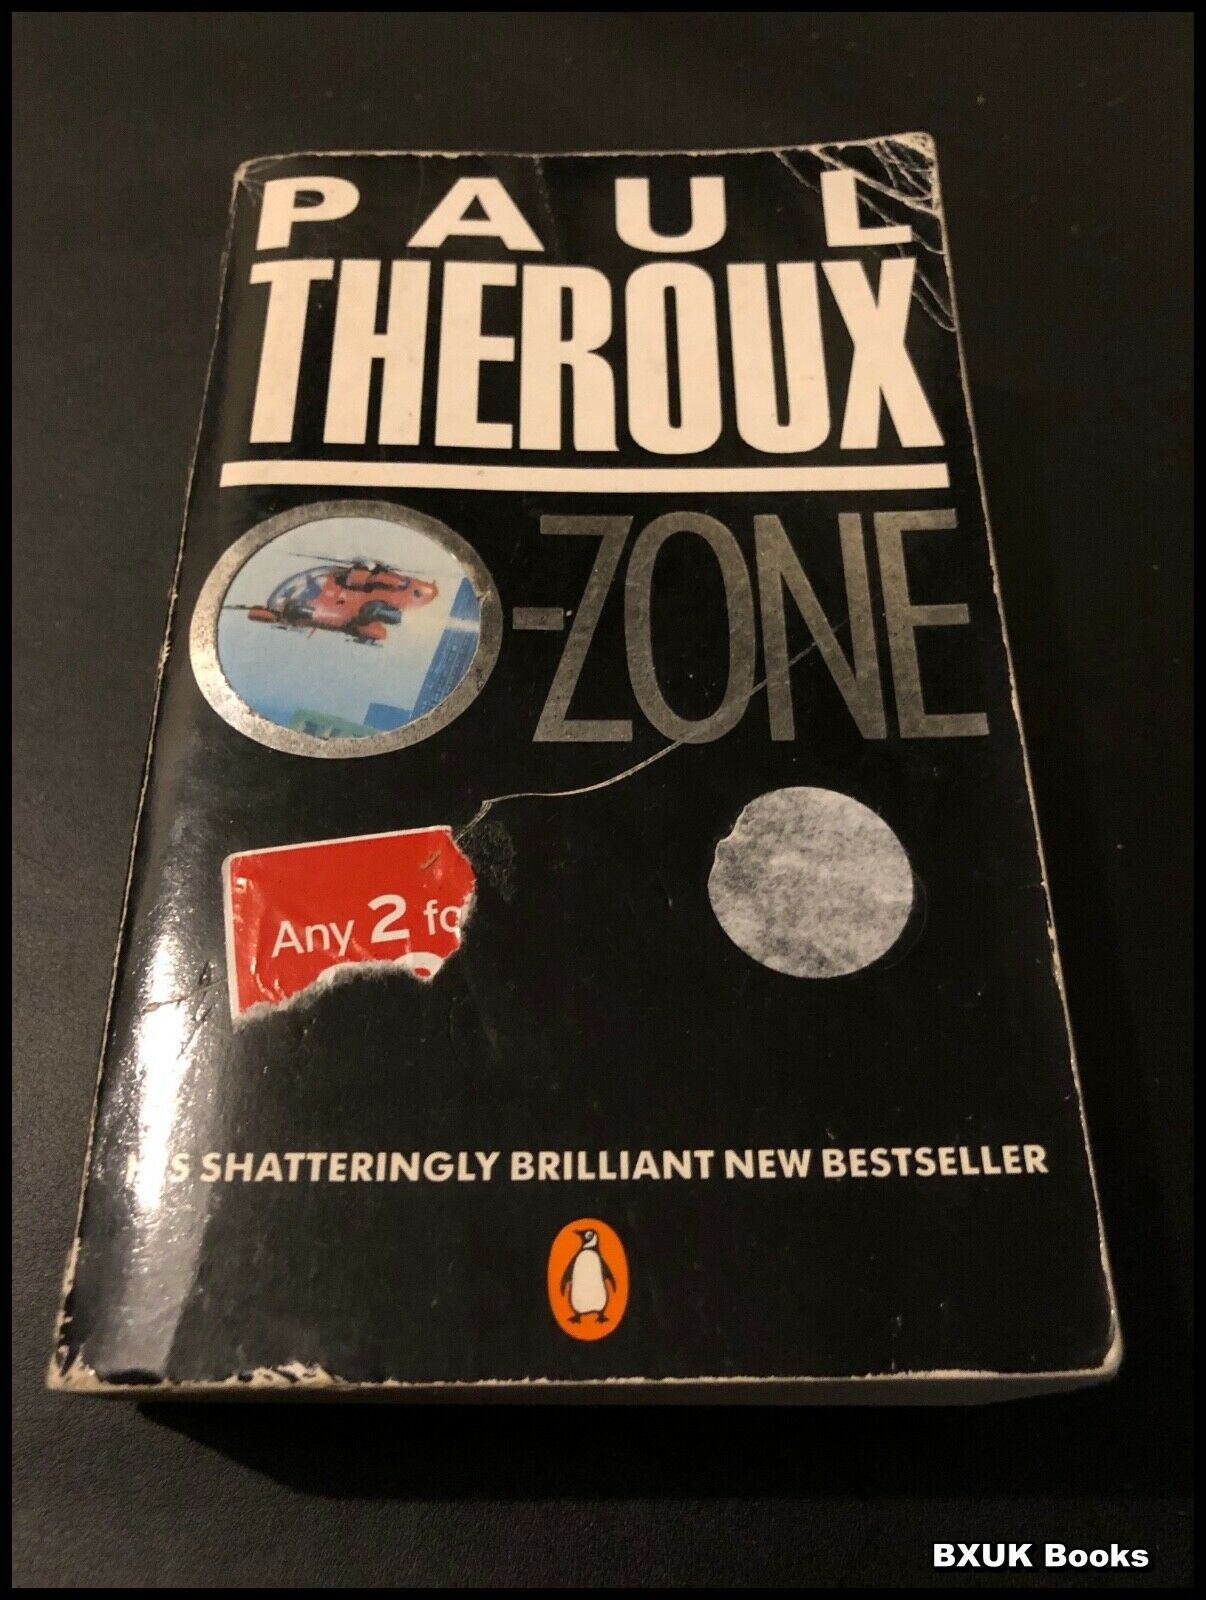 O-Zone by Paul Theroux (Paperback, 1987)